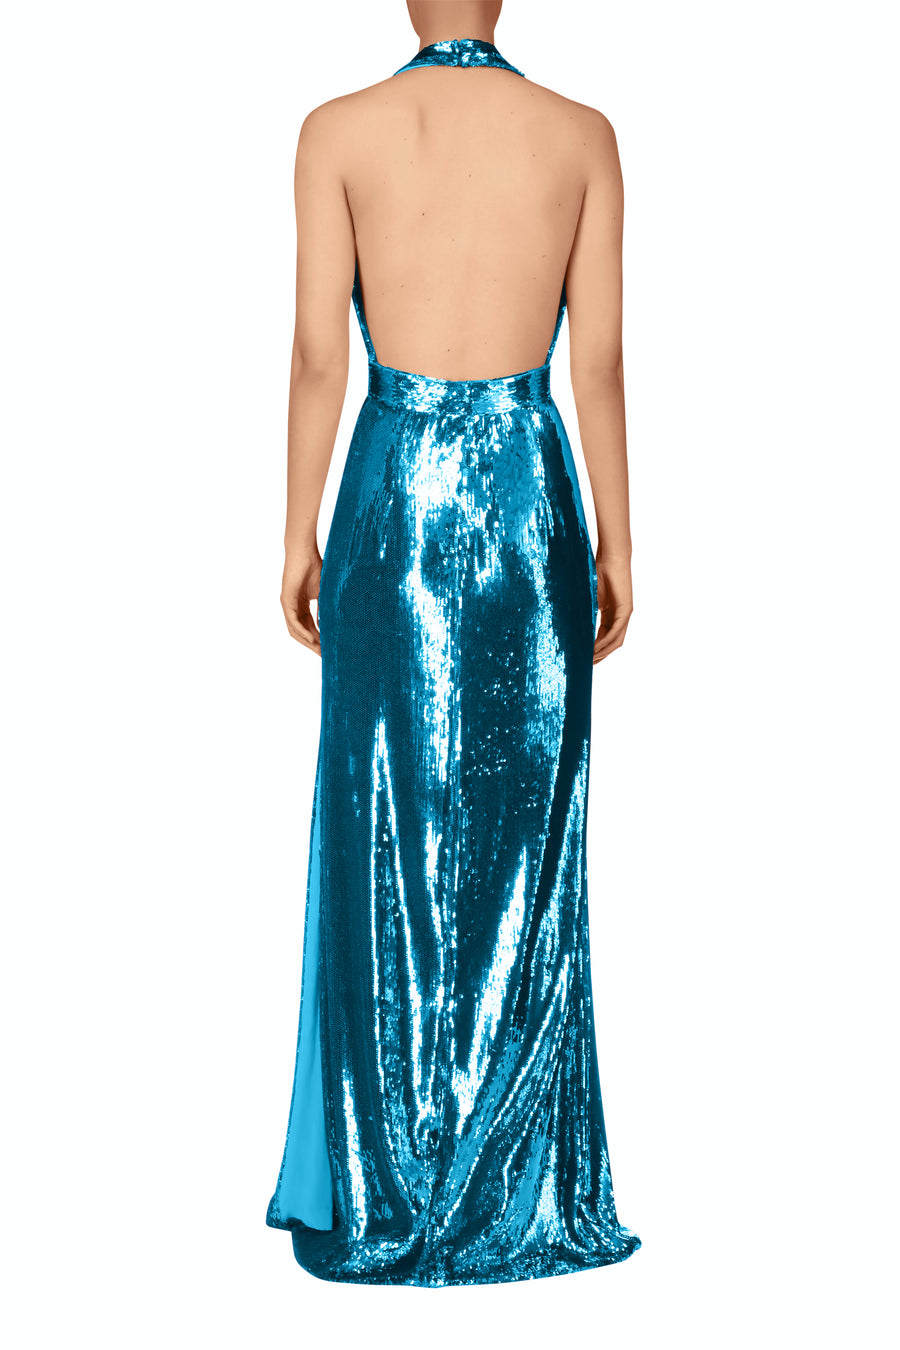 Teal Sequin Halter Gown With Sequin Flower Detail